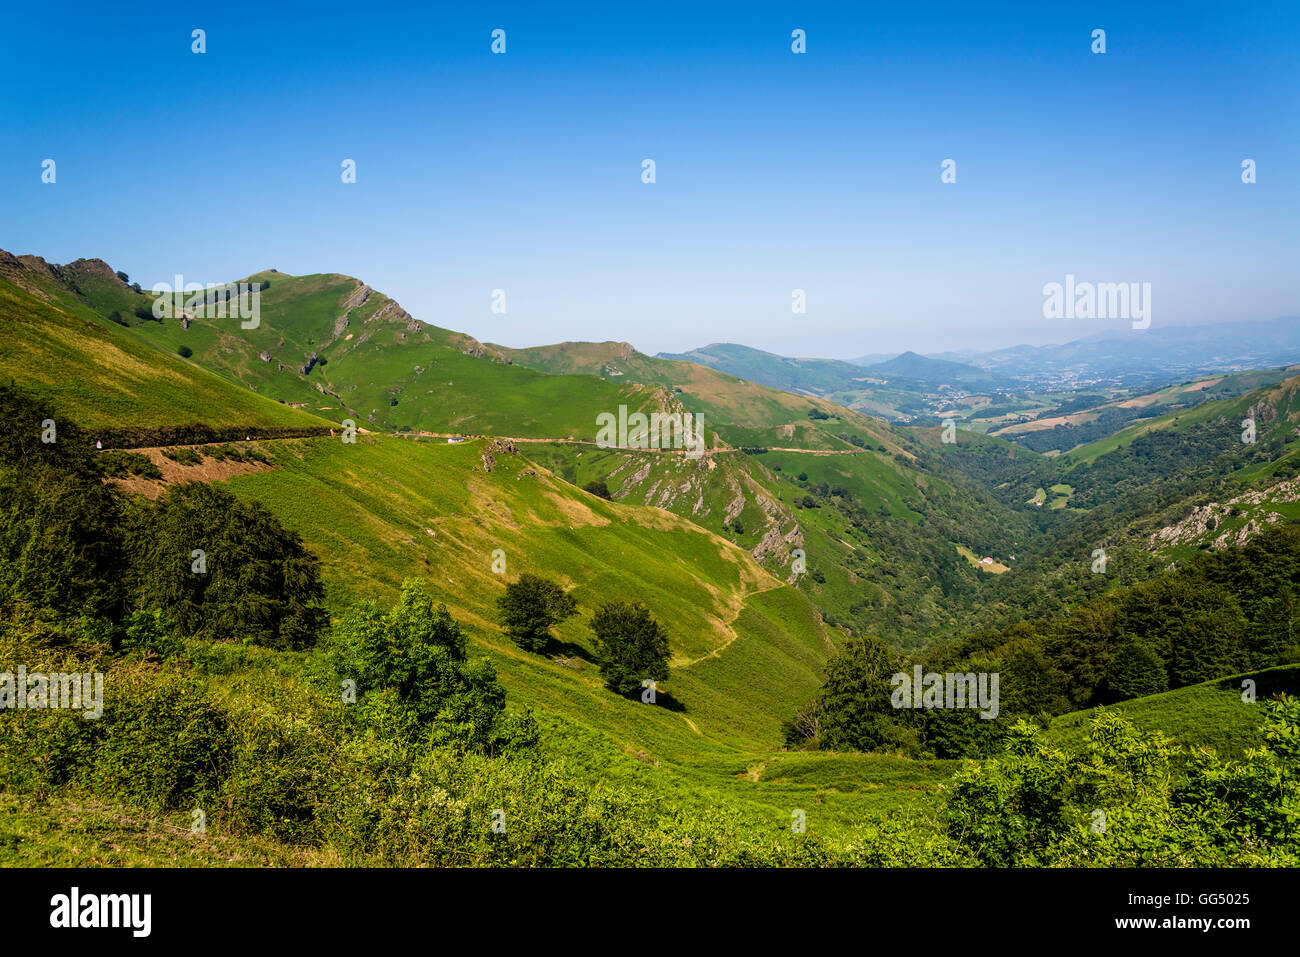 Garazi Baigorri valley, Inter-communality on the border between Basque Country in Spain and France Stock Photo